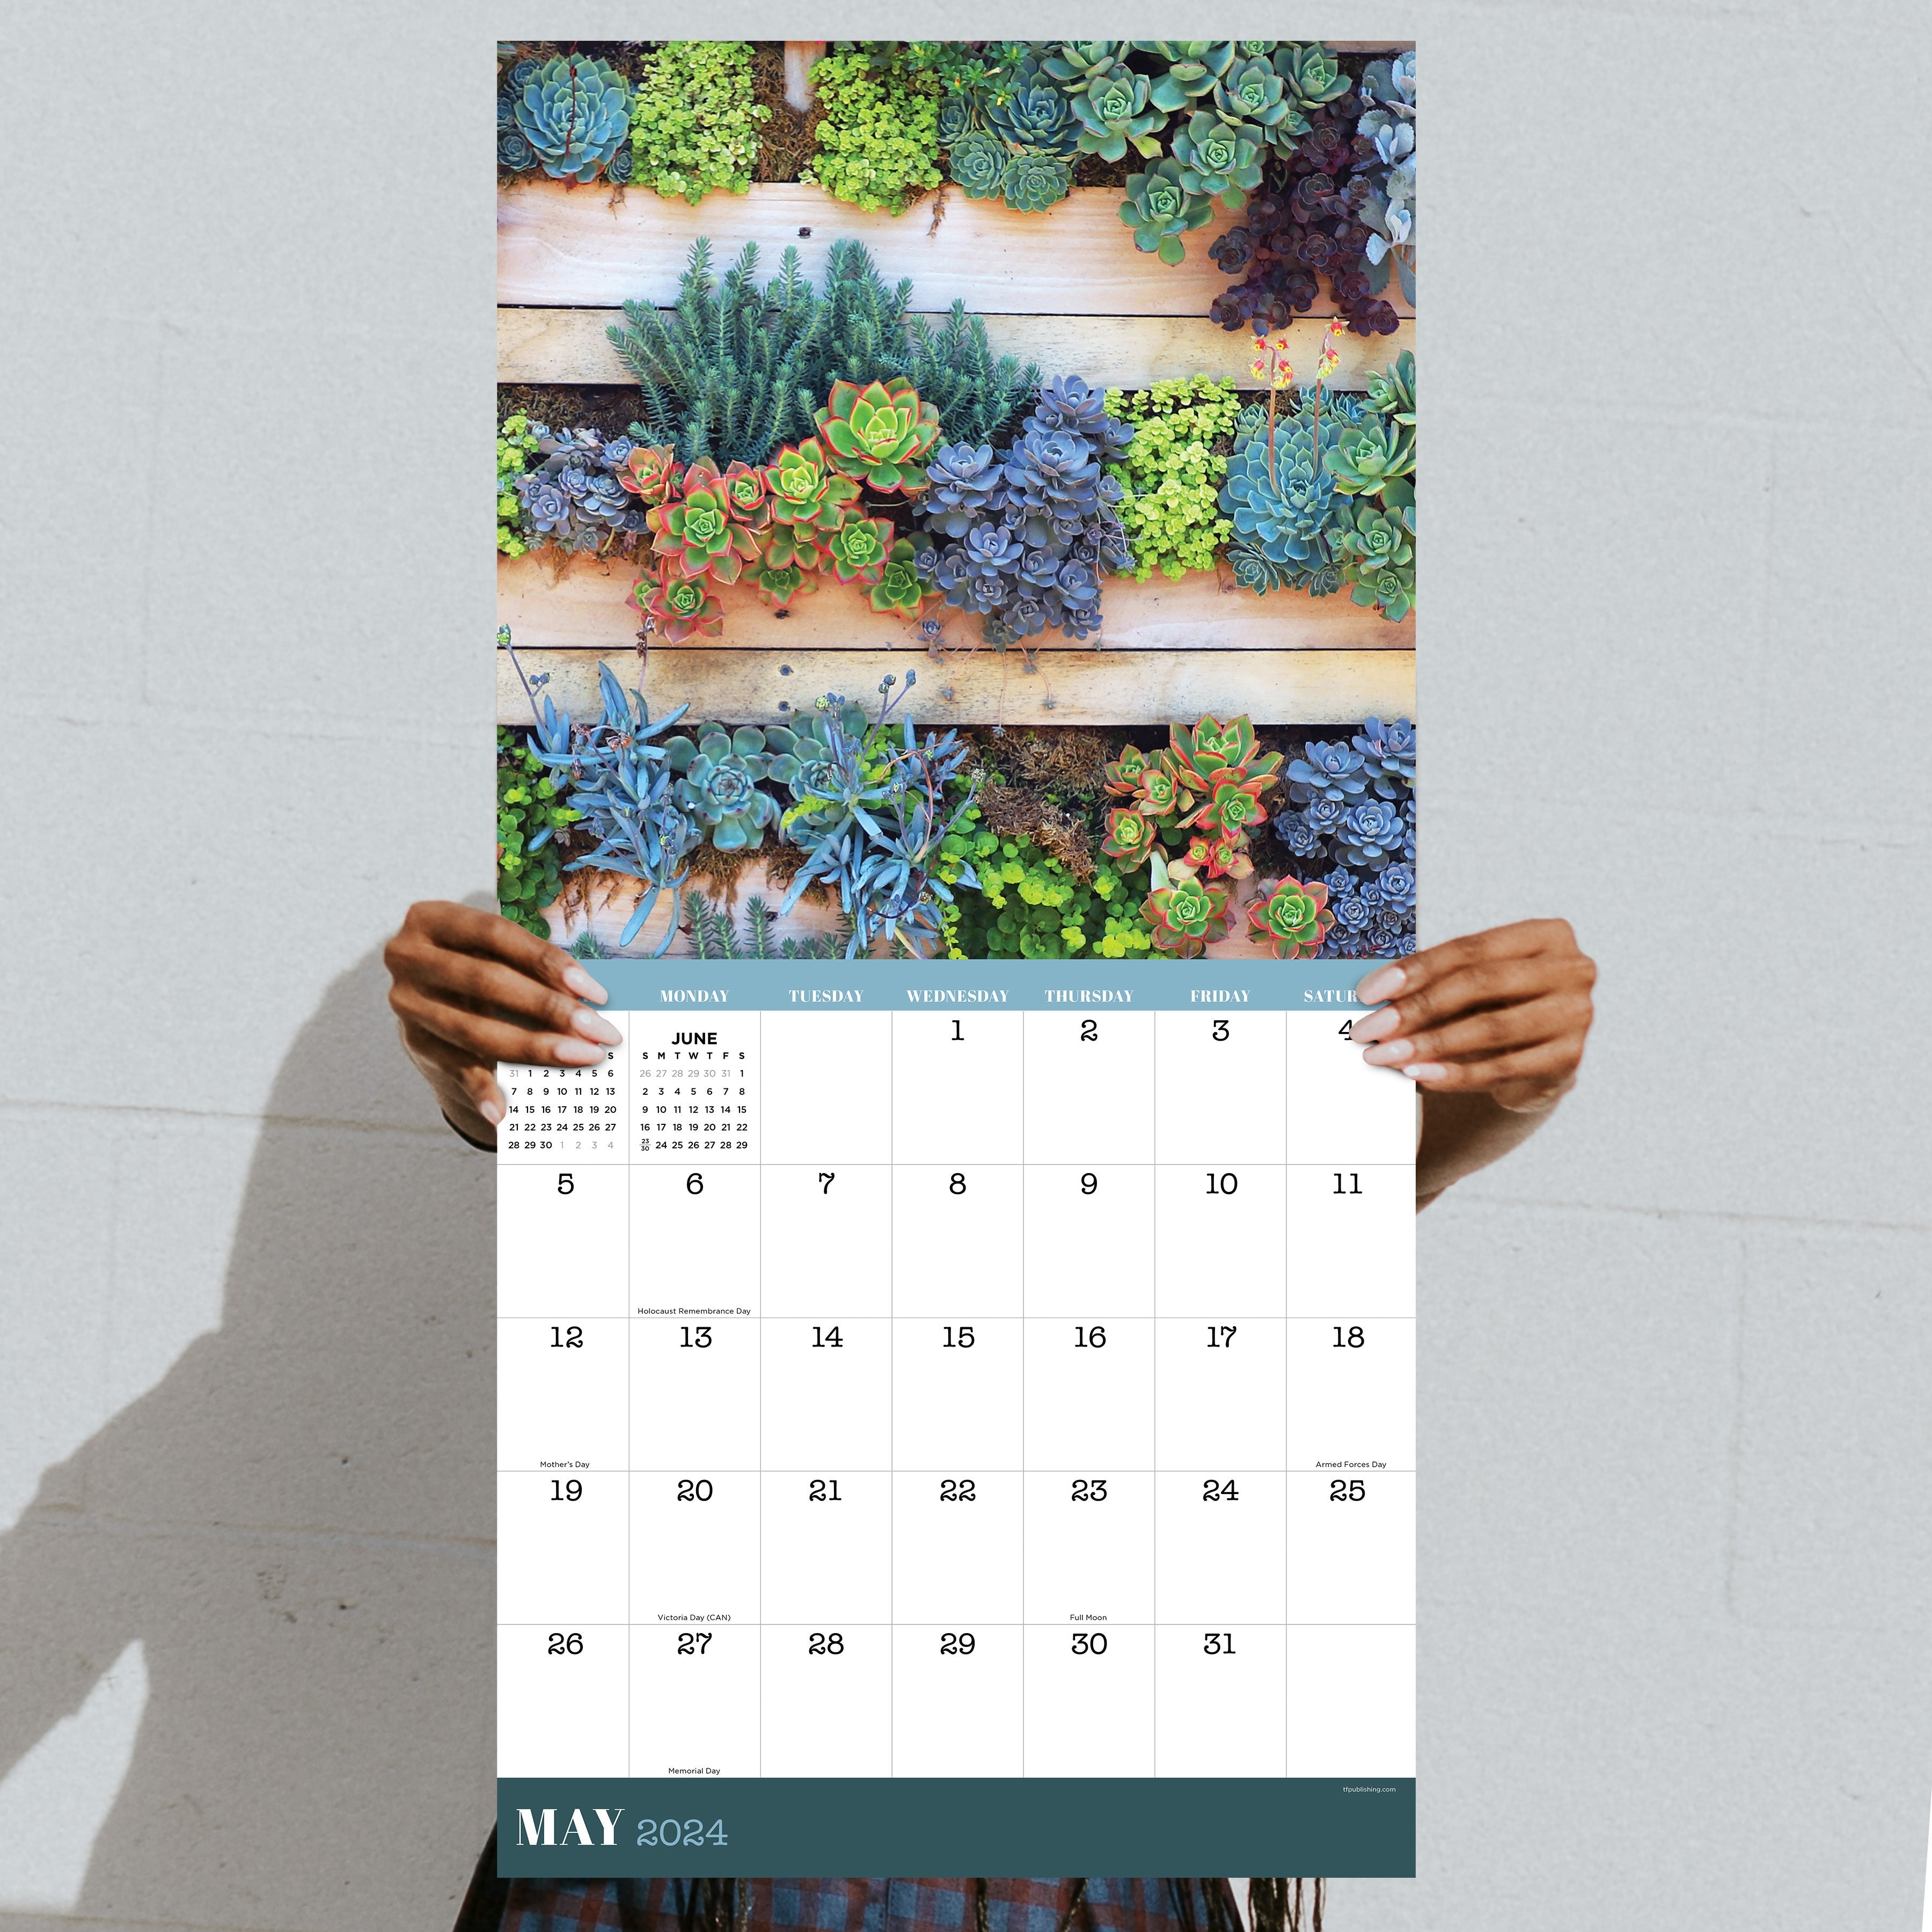 2024 Succulents (by TF Publishing) - Square Wall Calendar